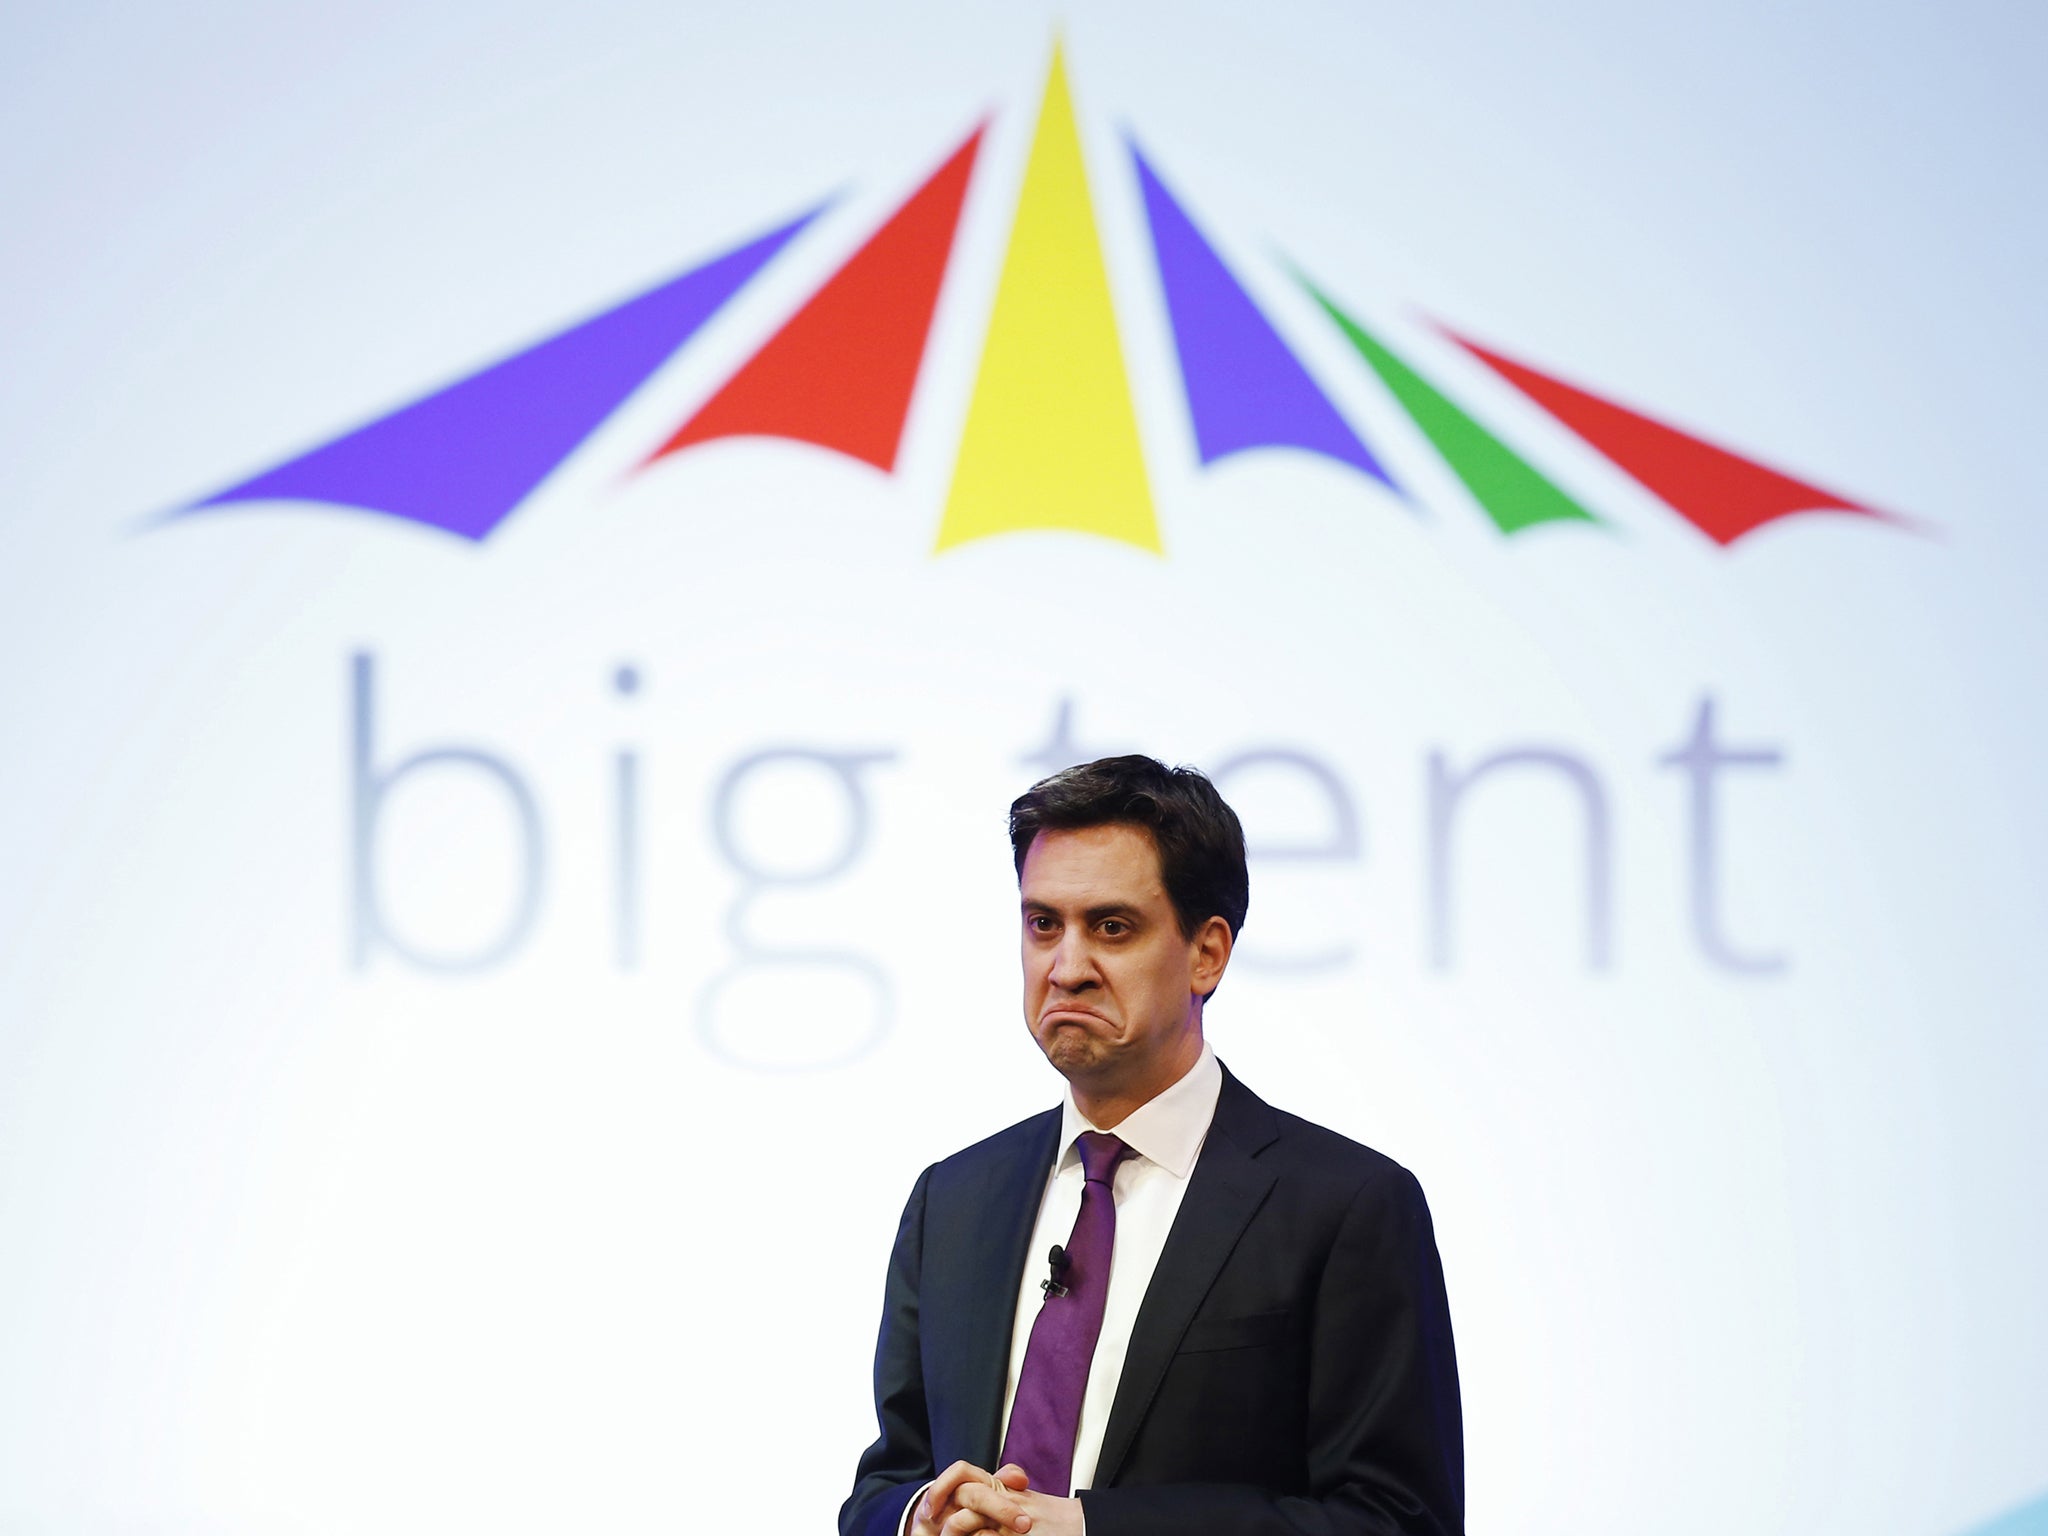 Britain's leader of the opposition Labour party Ed Miliband speaks at the Google big tent event at the Grove Hotel, on the outskirts of London May 22, 2013